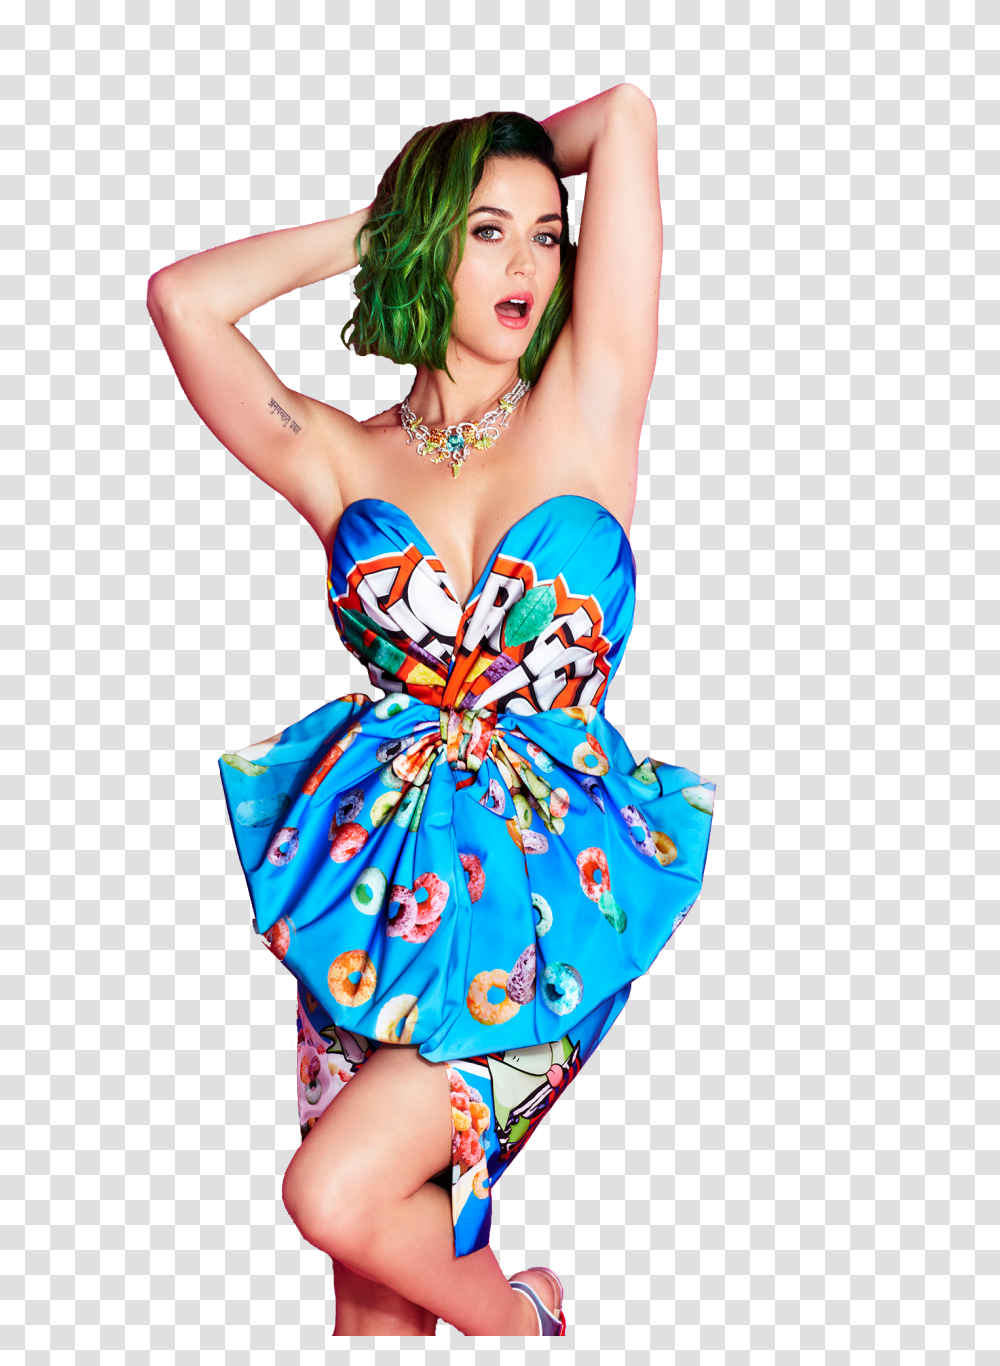 Download Katy Perry Hd Katy Perry Cosmopolitan, Evening Dress, Robe, Gown Transparent Png